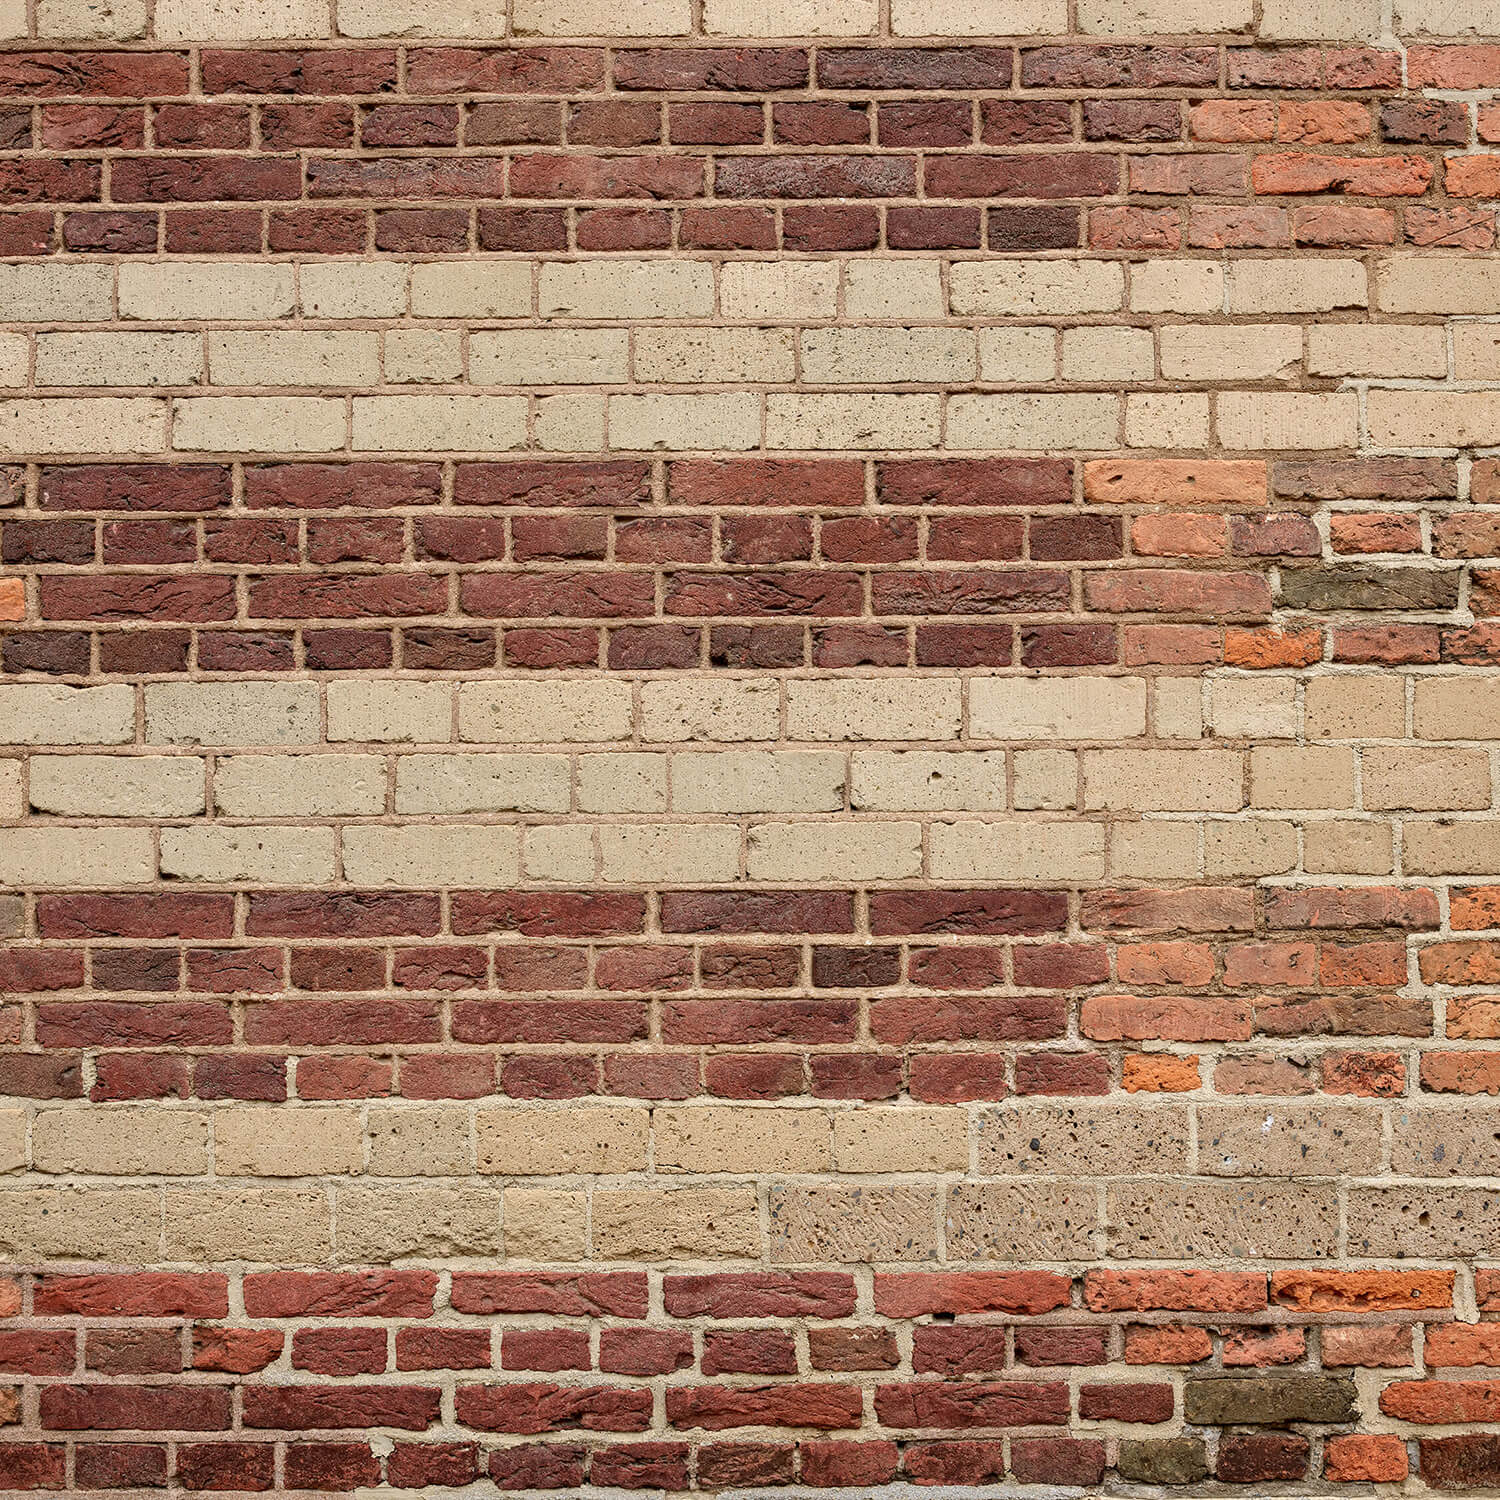 Wall with different kinds of bricks